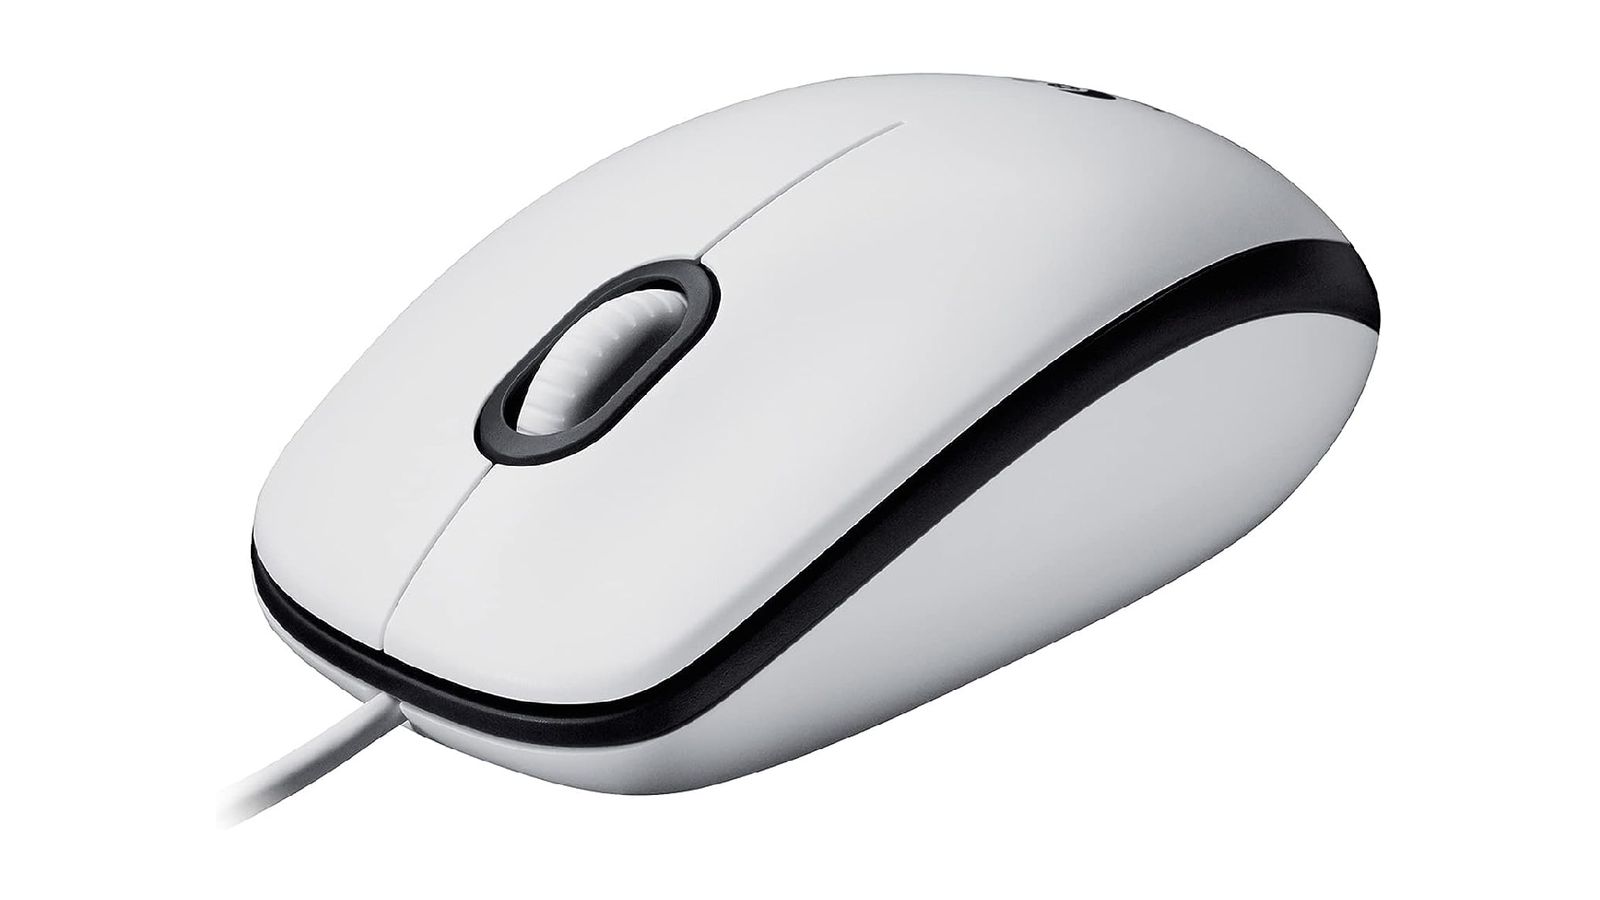 Logitech M100 product image of a white wired mouse with black details around the edge and around the scroll wheel.